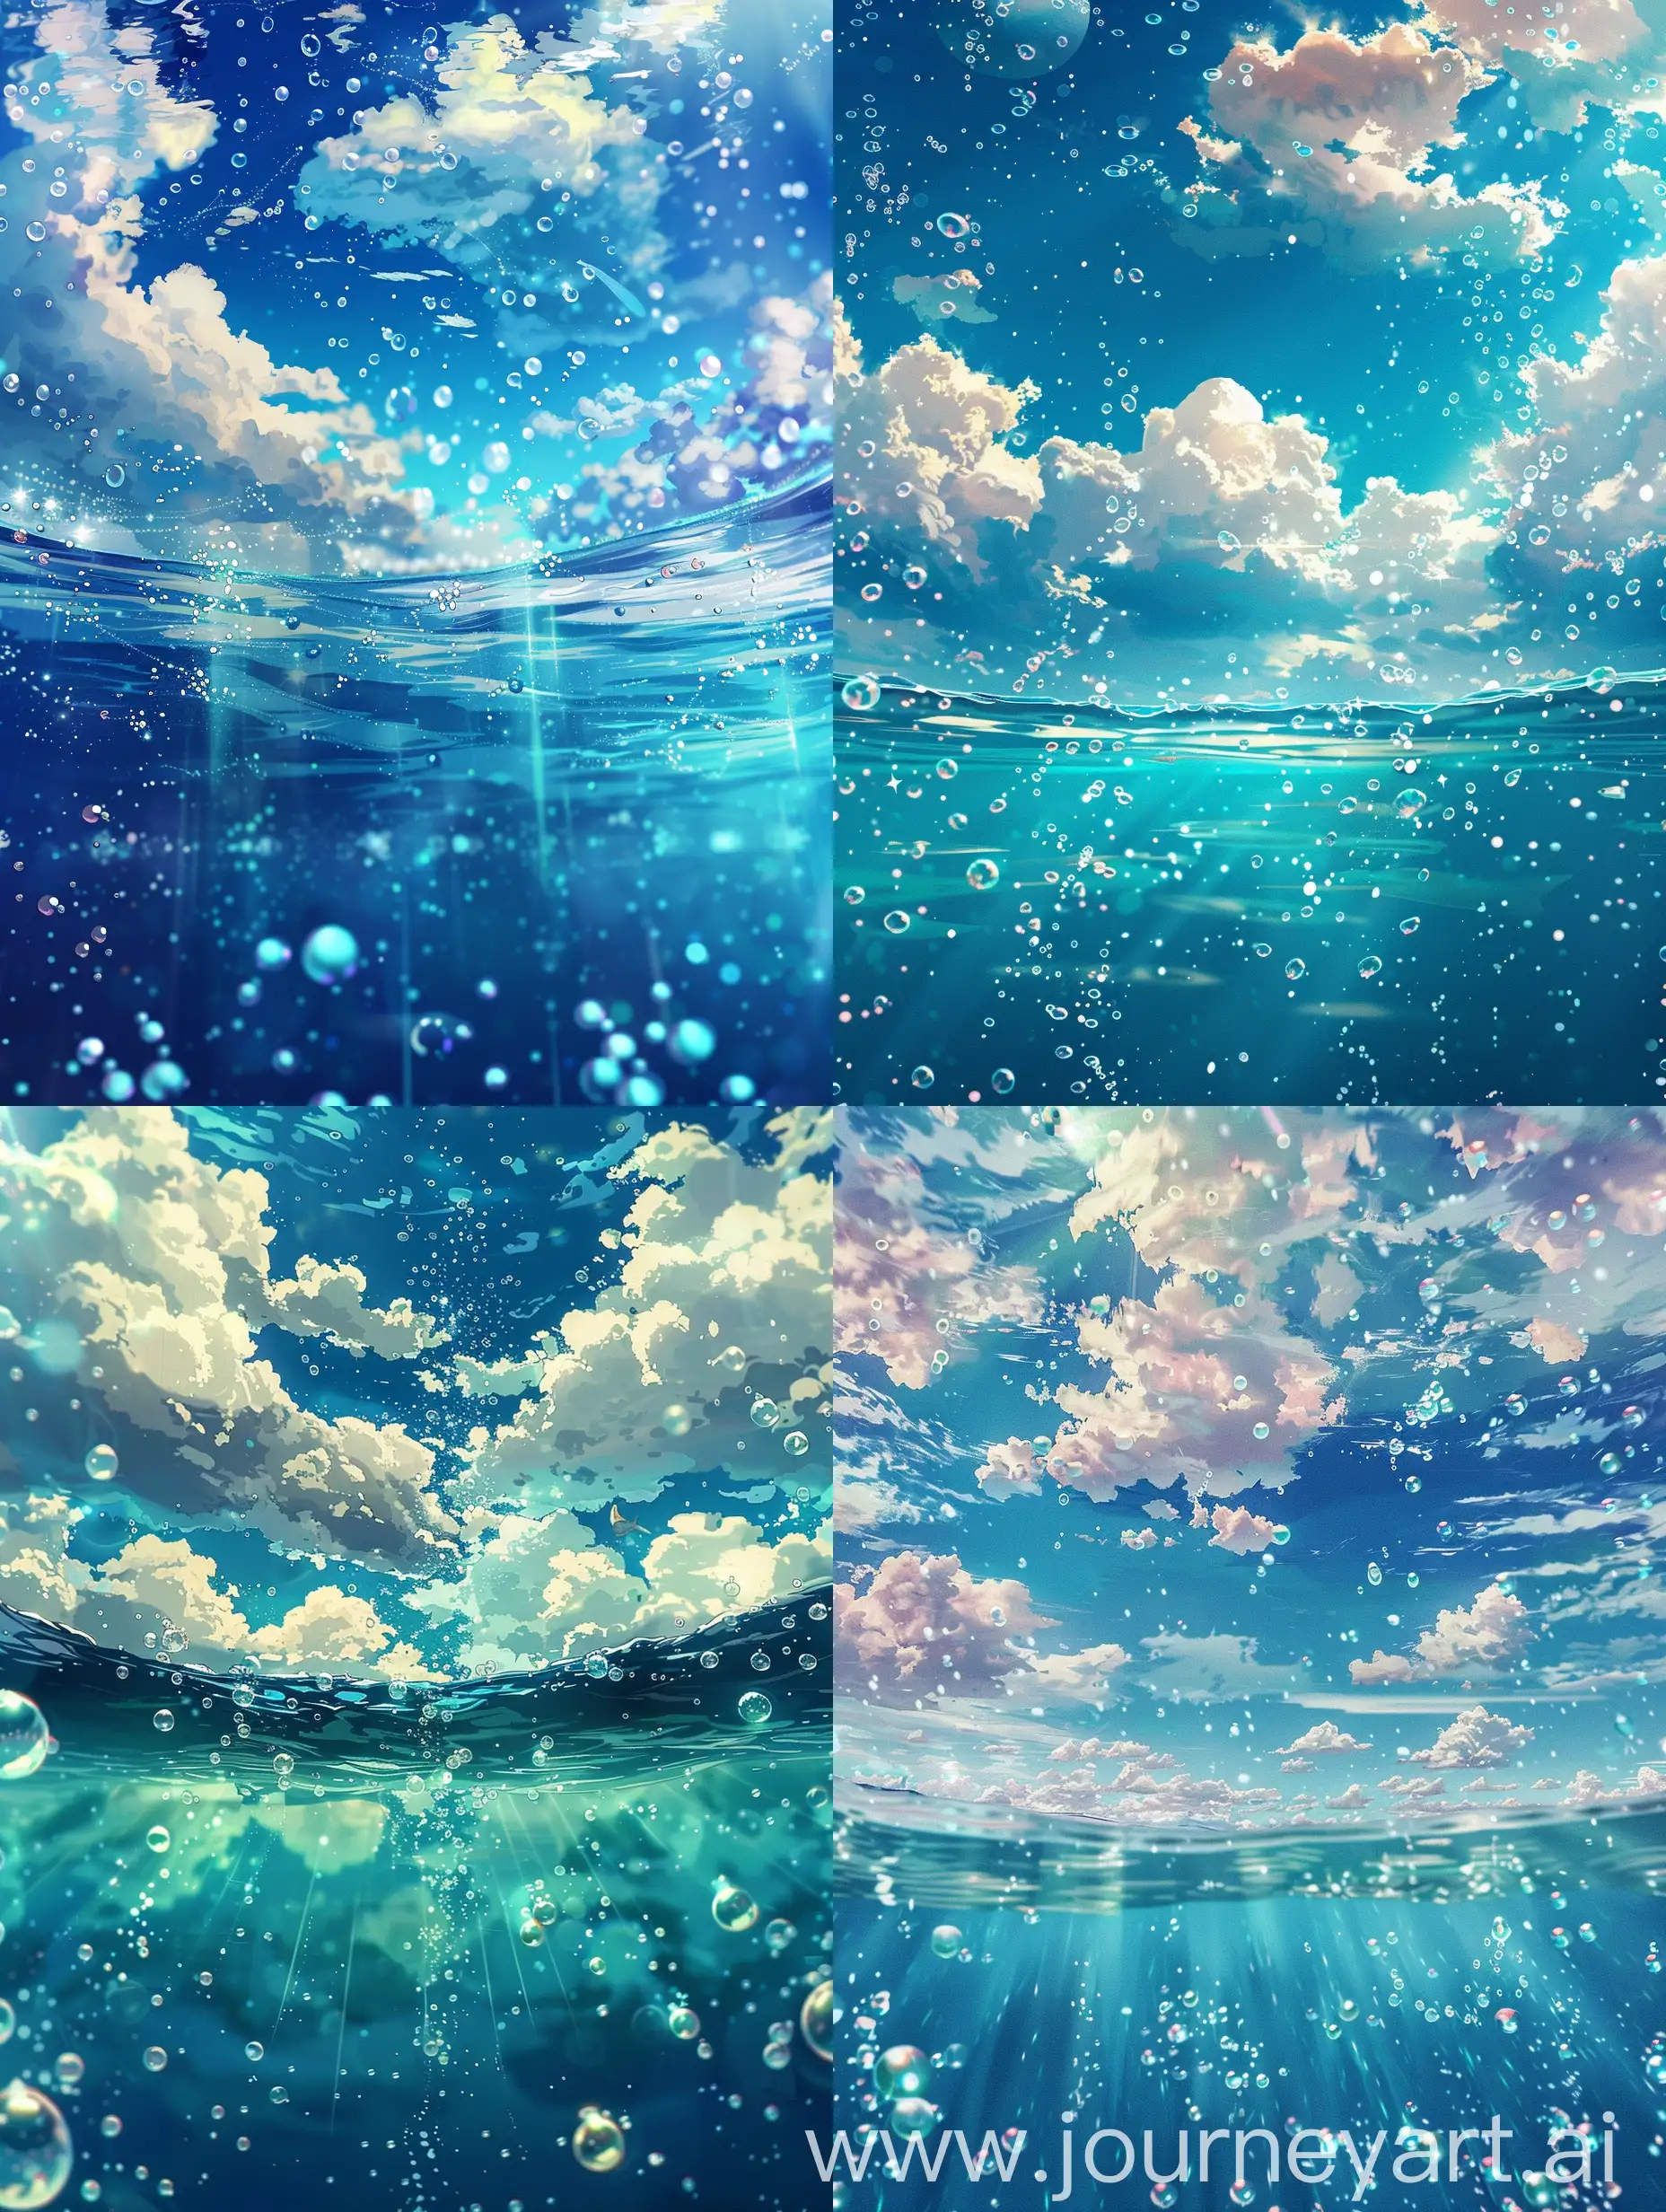 Underwater-Anime-Aesthetic-Magical-Makoto-ShinkaiStyle-SkyWater-Blend-with-Bubbles